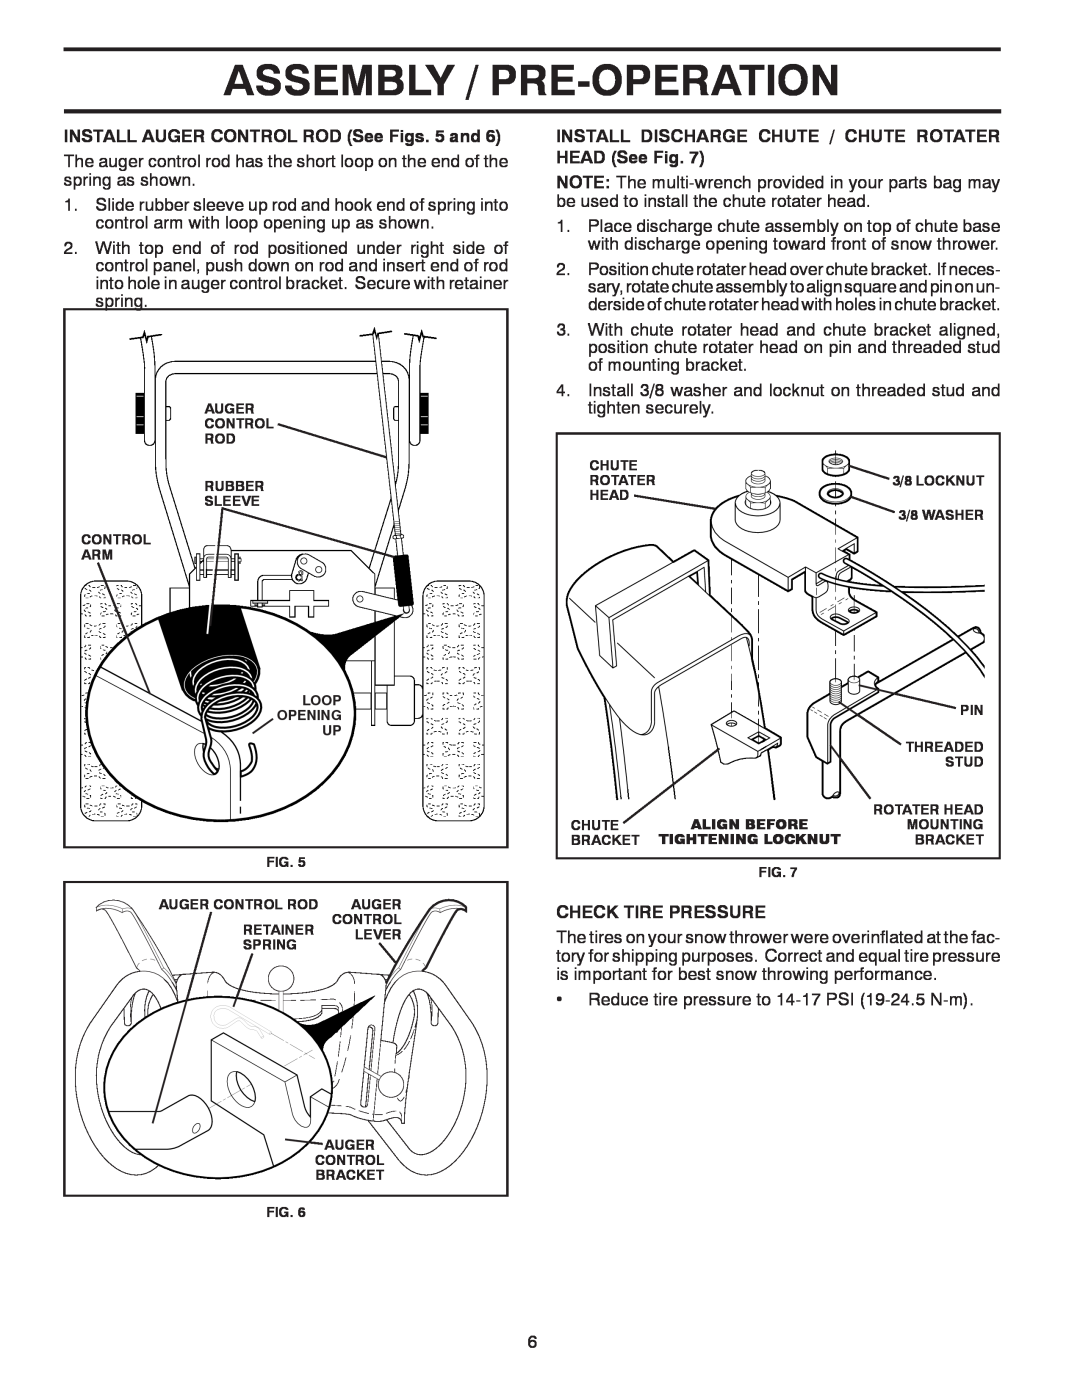 Poulan 415136 owner manual Assembly / Pre-Operation, INSTALL AUGER CONTROL ROD See Figs. 5 and, Check Tire Pressure 